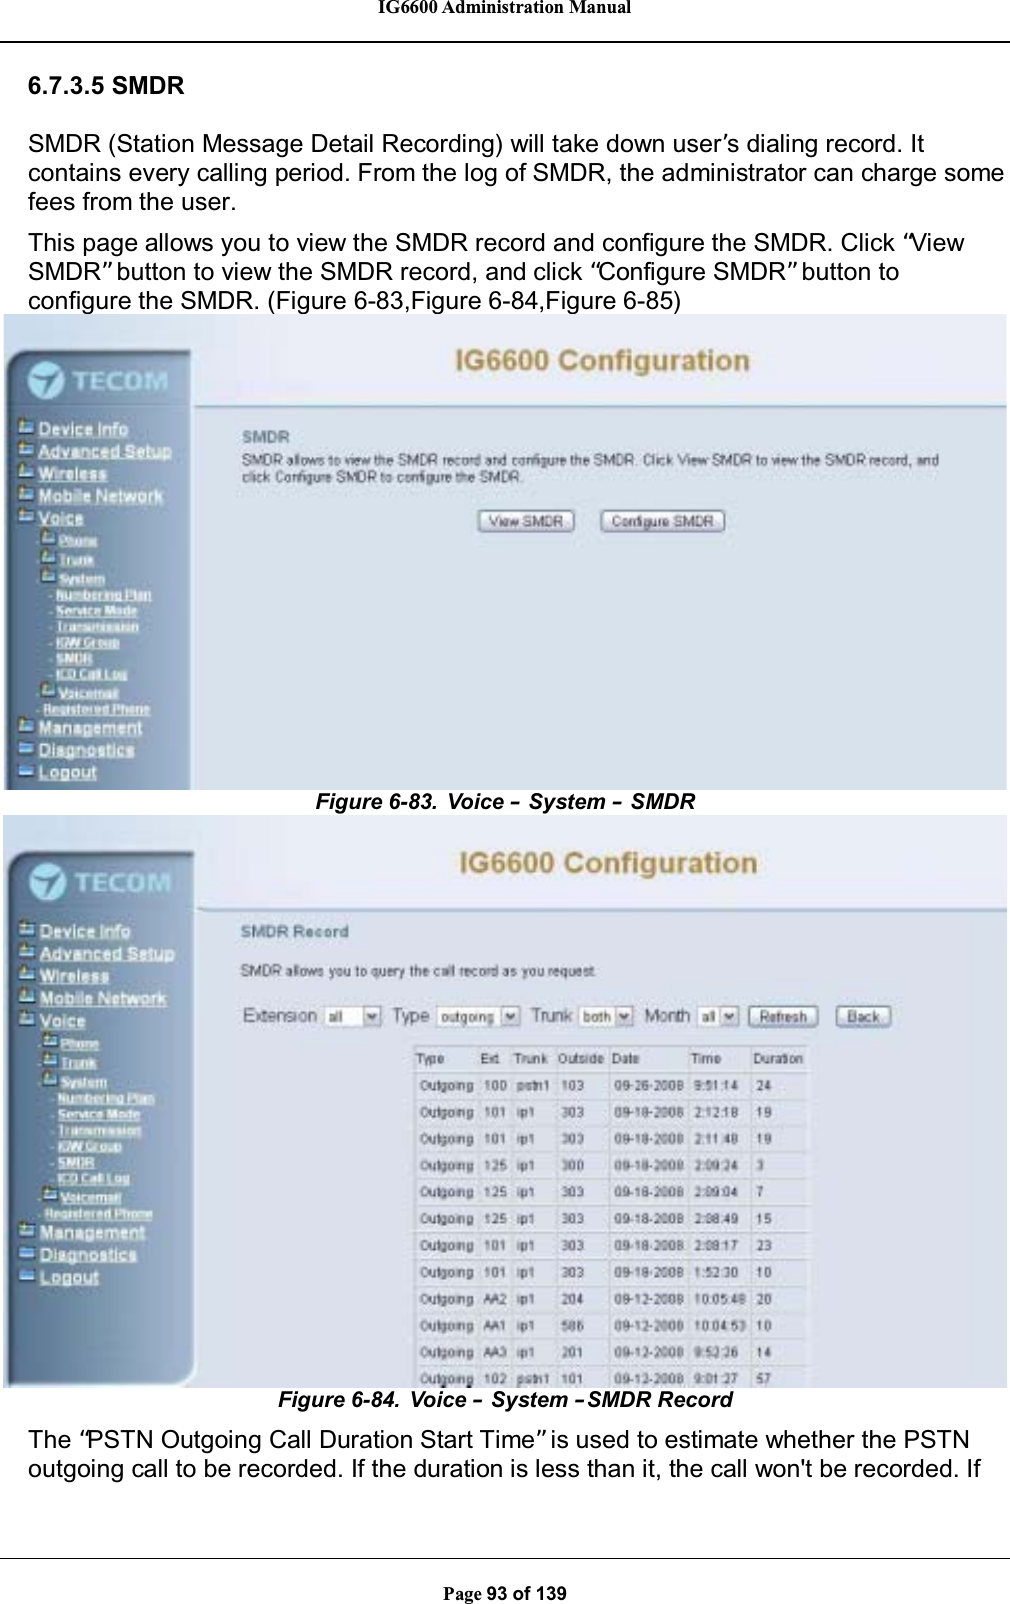 IG6600 Administration ManualPage 93 of 1396.7.3.5 SMDRSMDR (Station Message Detail Recording) will take down user’s dialing record. It contains every calling period. From the log of SMDR, the administrator can charge somefees from the user.This page allows you to view the SMDR record and configure the SMDR. Click “ViewSMDR”button to view the SMDR record, and click “Configure SMDR”button toconfigure the SMDR. (Figure 6-83,Figure 6-84,Figure 6-85)Figure 6-83. Voice –System –SMDRFigure 6-84. Voice –System –SMDR RecordThe “PSTN Outgoing Call Duration Start Time”is used to estimate whether the PSTNoutgoing call to be recorded. If the duration is less than it, the call won&apos;t be recorded. If